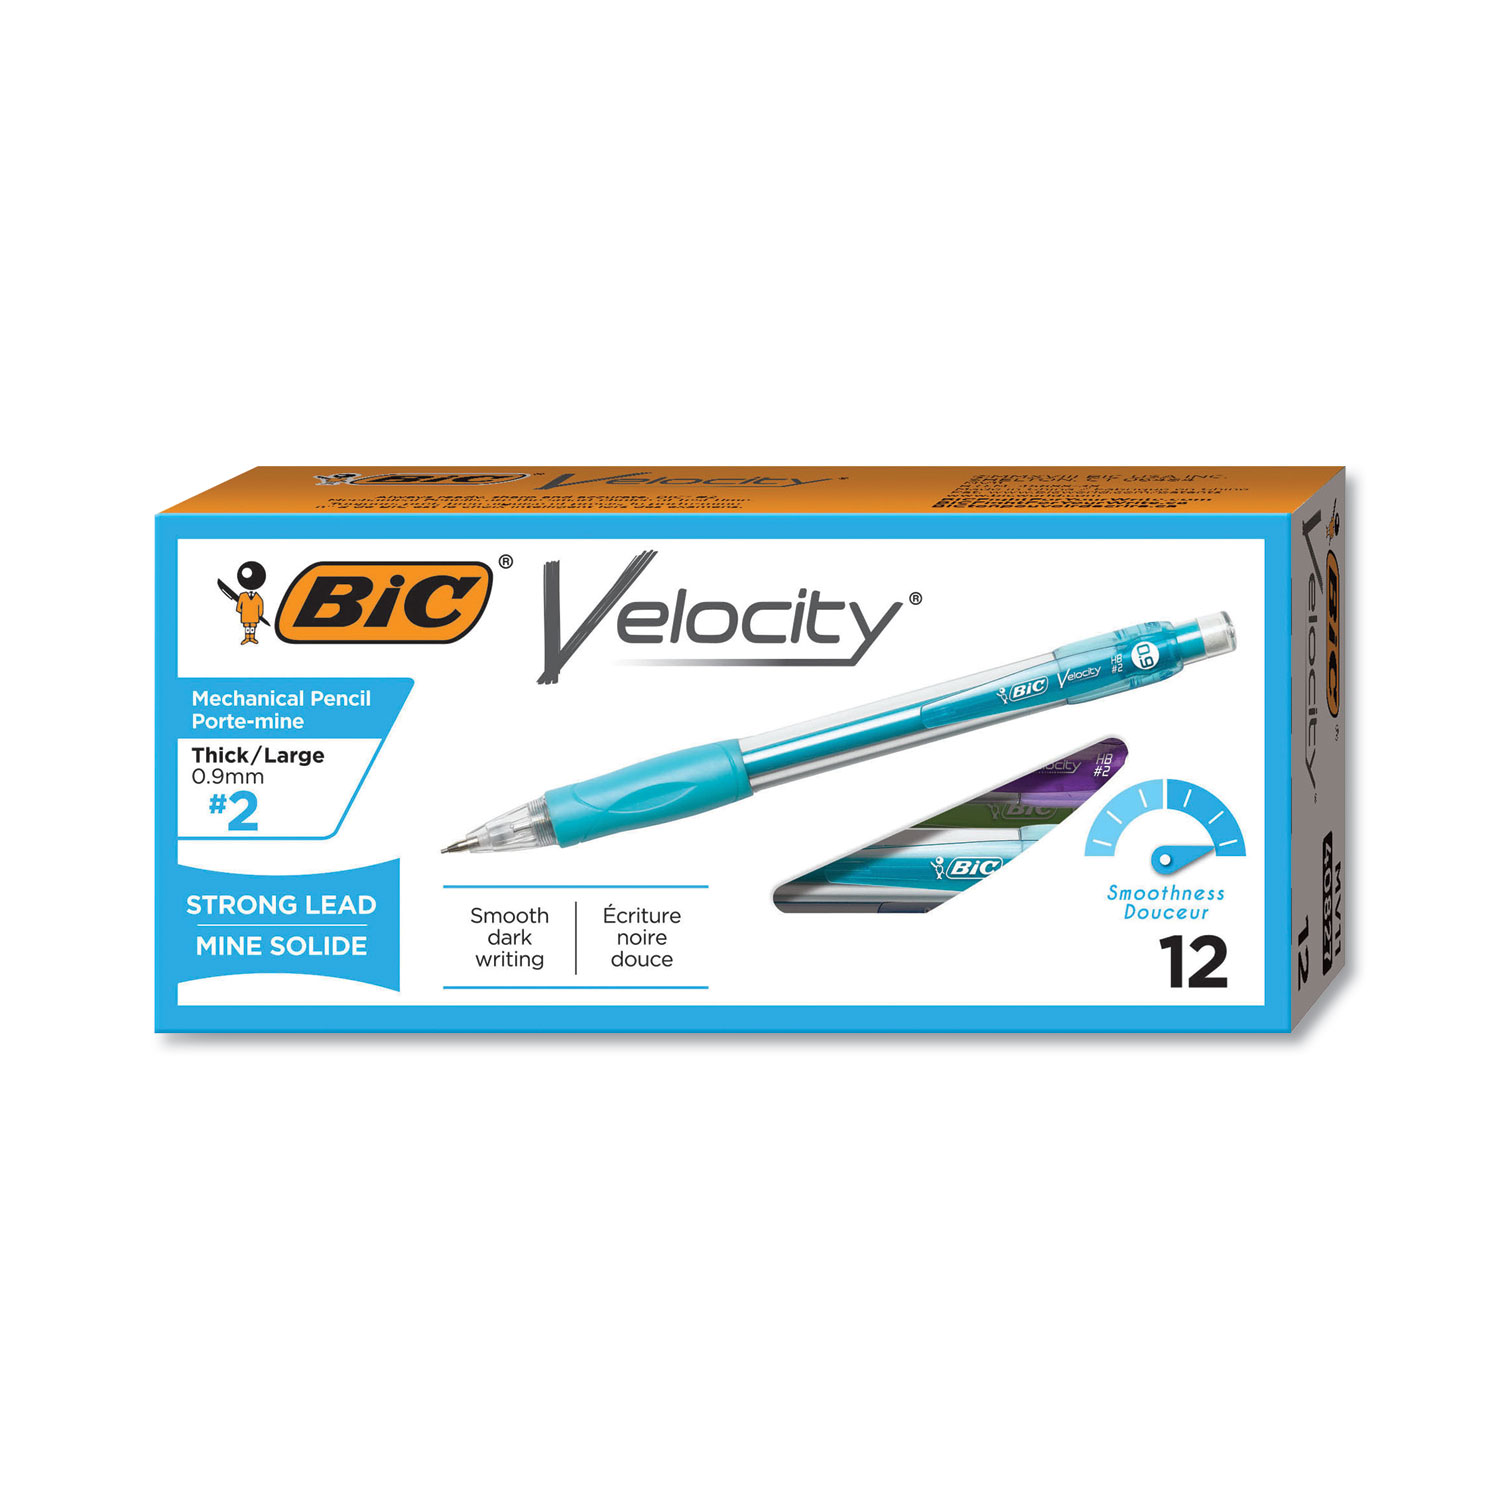 Velocity Original Mechanical Pencil 1 Pack of 4-Count Thick Point 0.9mm 